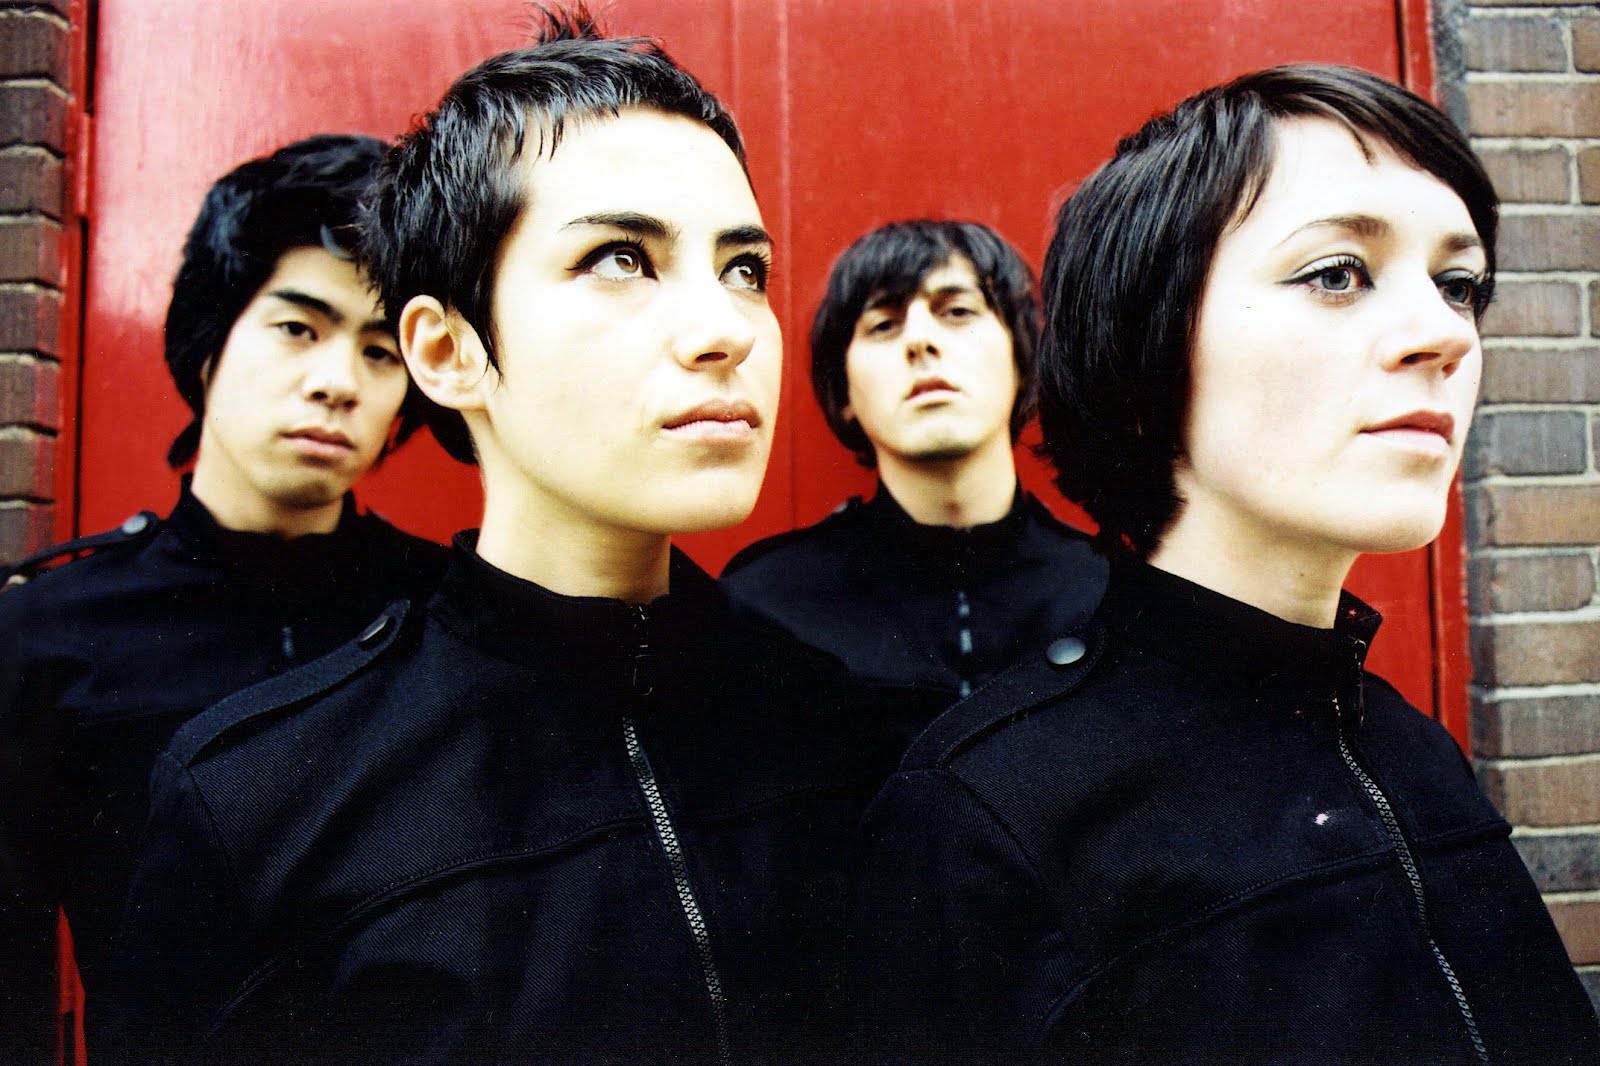 Ladytron Releases New Single 'The Animals' After 7 Years Hiatus